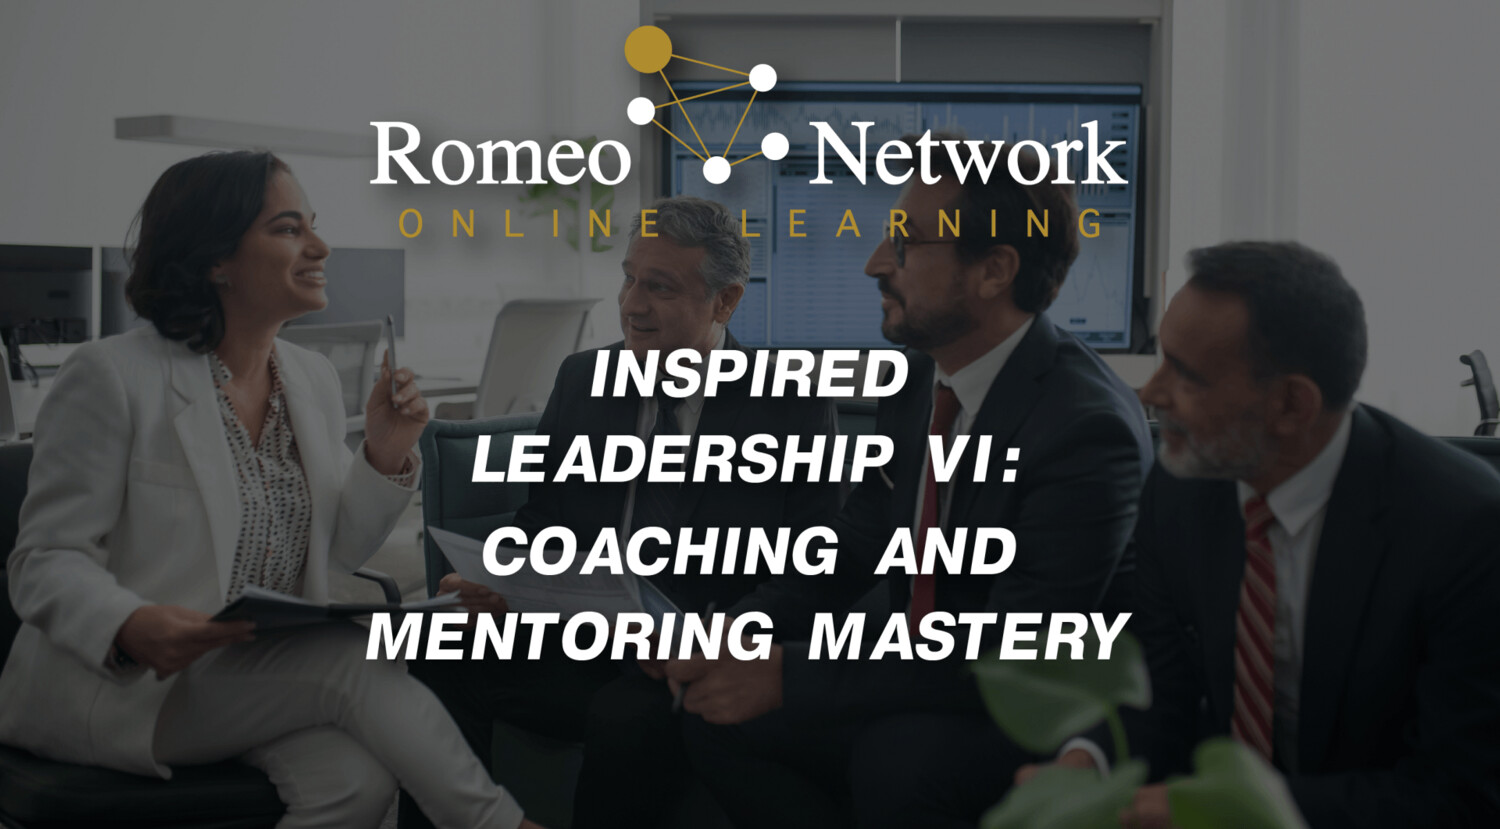 Inspired Leadership VI: Coaching and Mentoring Mastery